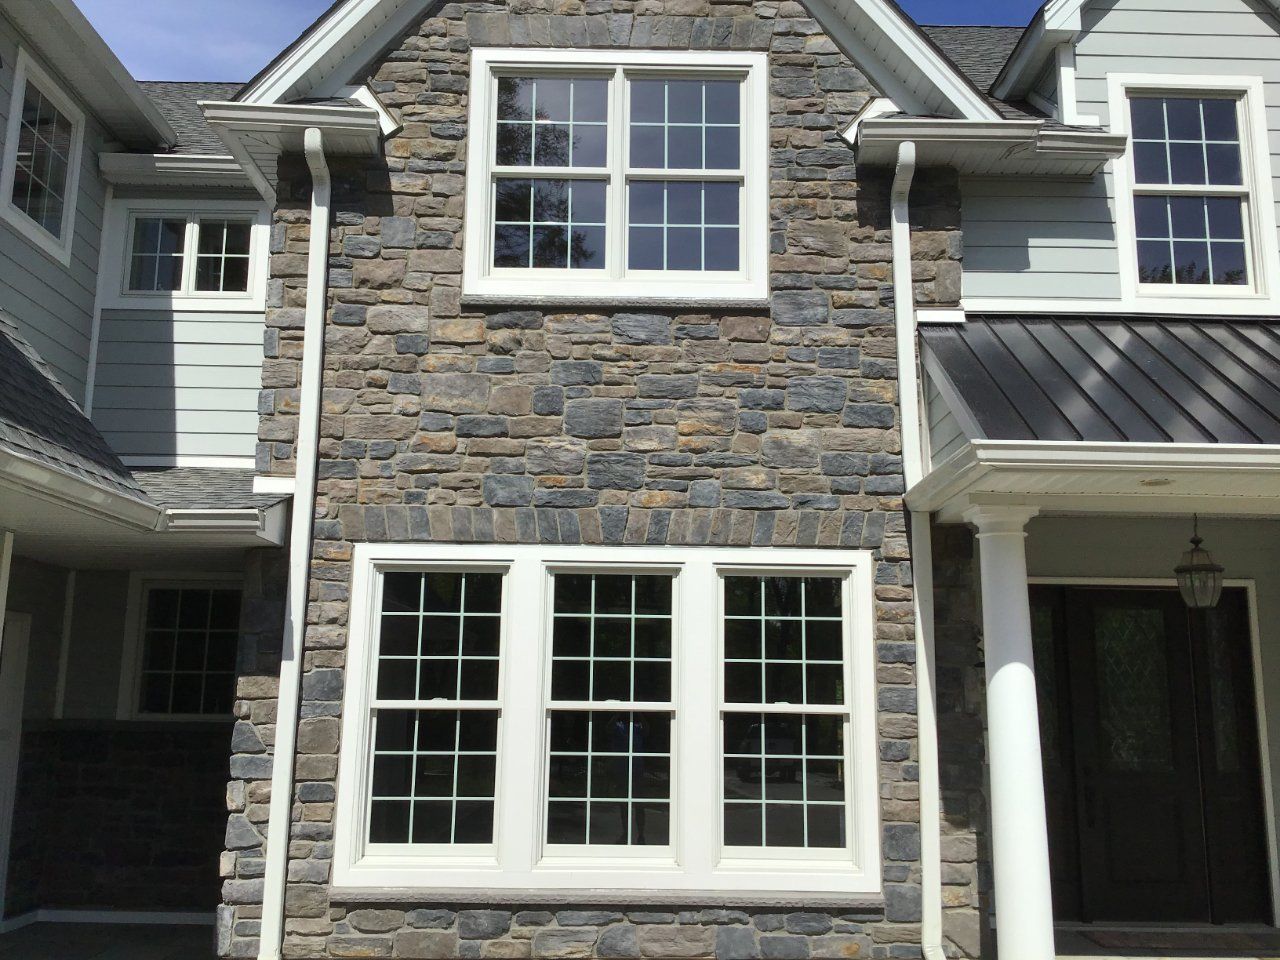 House with stone siding